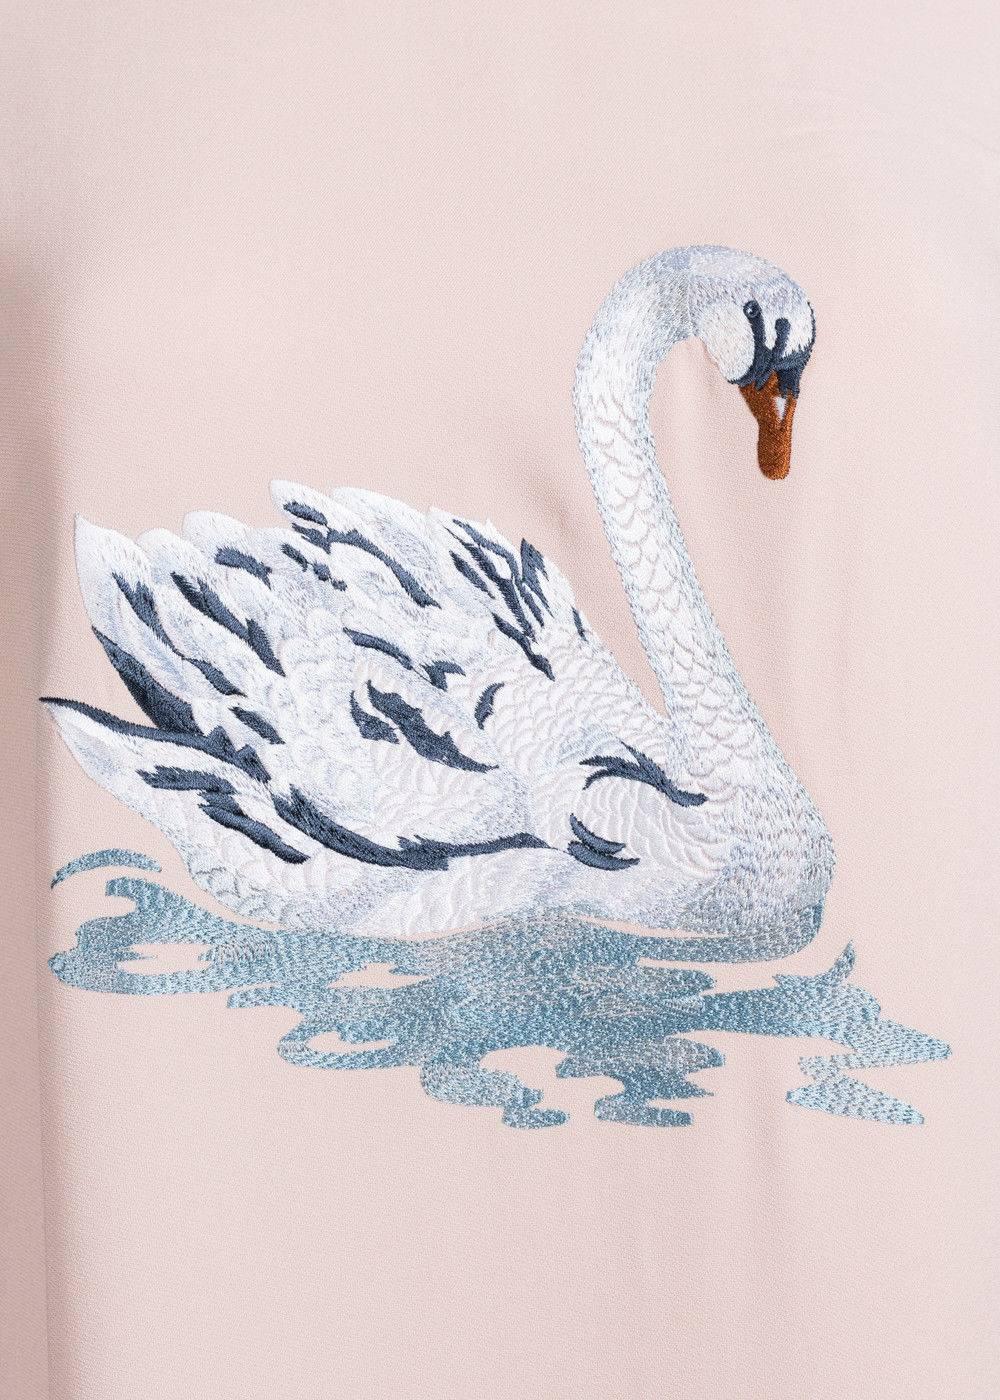 Brand New Stella McCartney Swam Embroidered Dress
Original Tags 
Retails $1250.00
Size EUR 40 / US 8

The Stella McCartney Swan Embroidered dress is the perfect essential. This long sleeved piece features a fine embroidered swan on its center. You